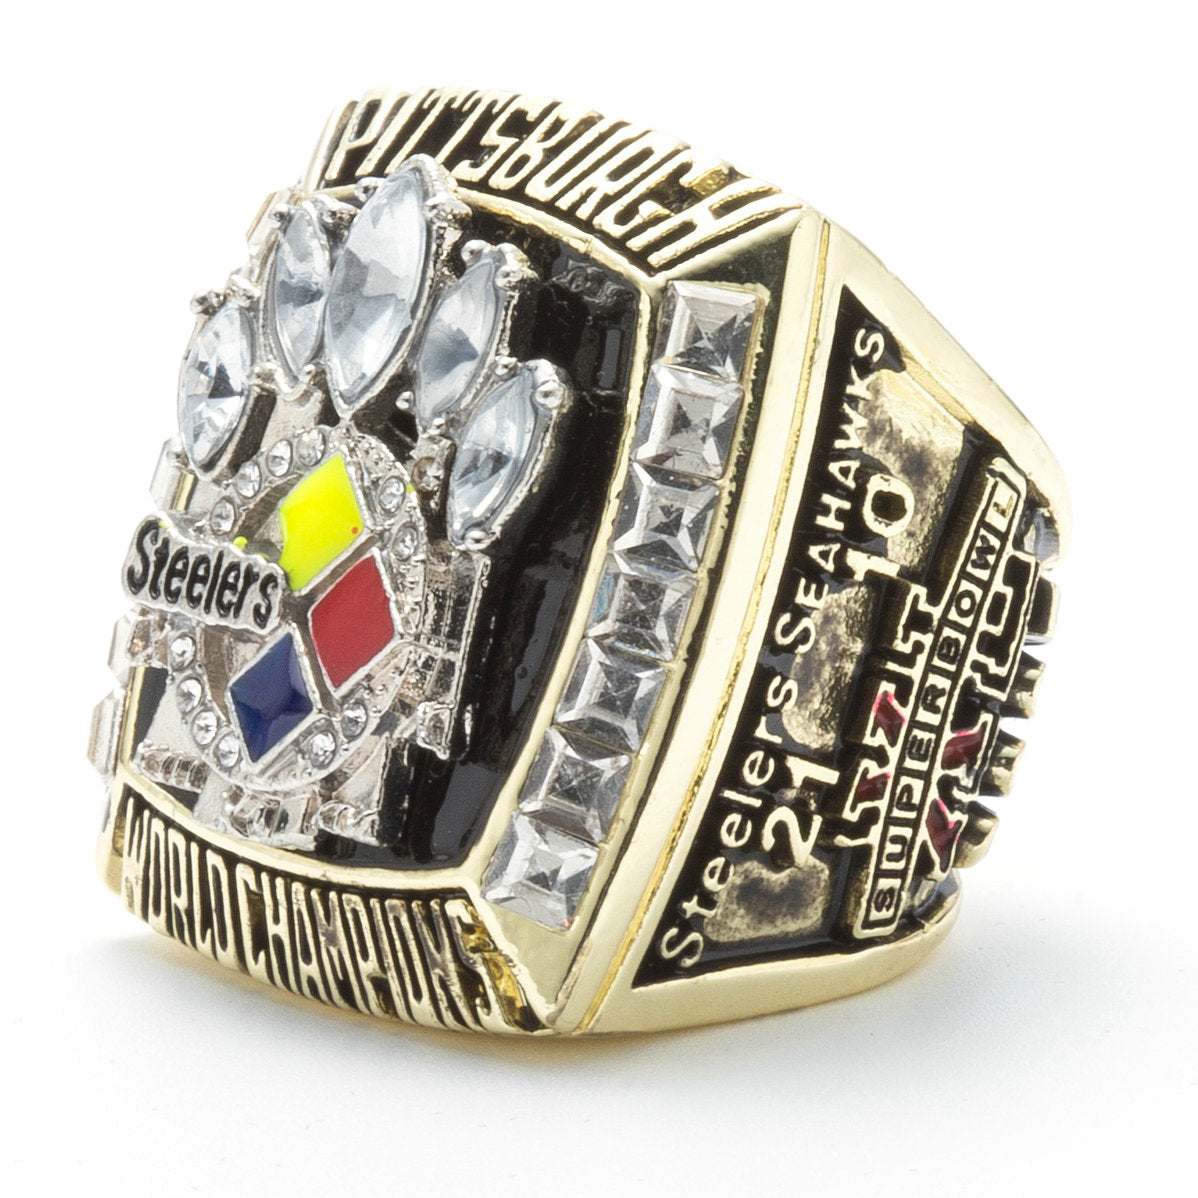 AJZYX 2005 Pittsburgh Steelers Super Bowl Championship Replica Ring Collectible Souvenir Size 9-12 